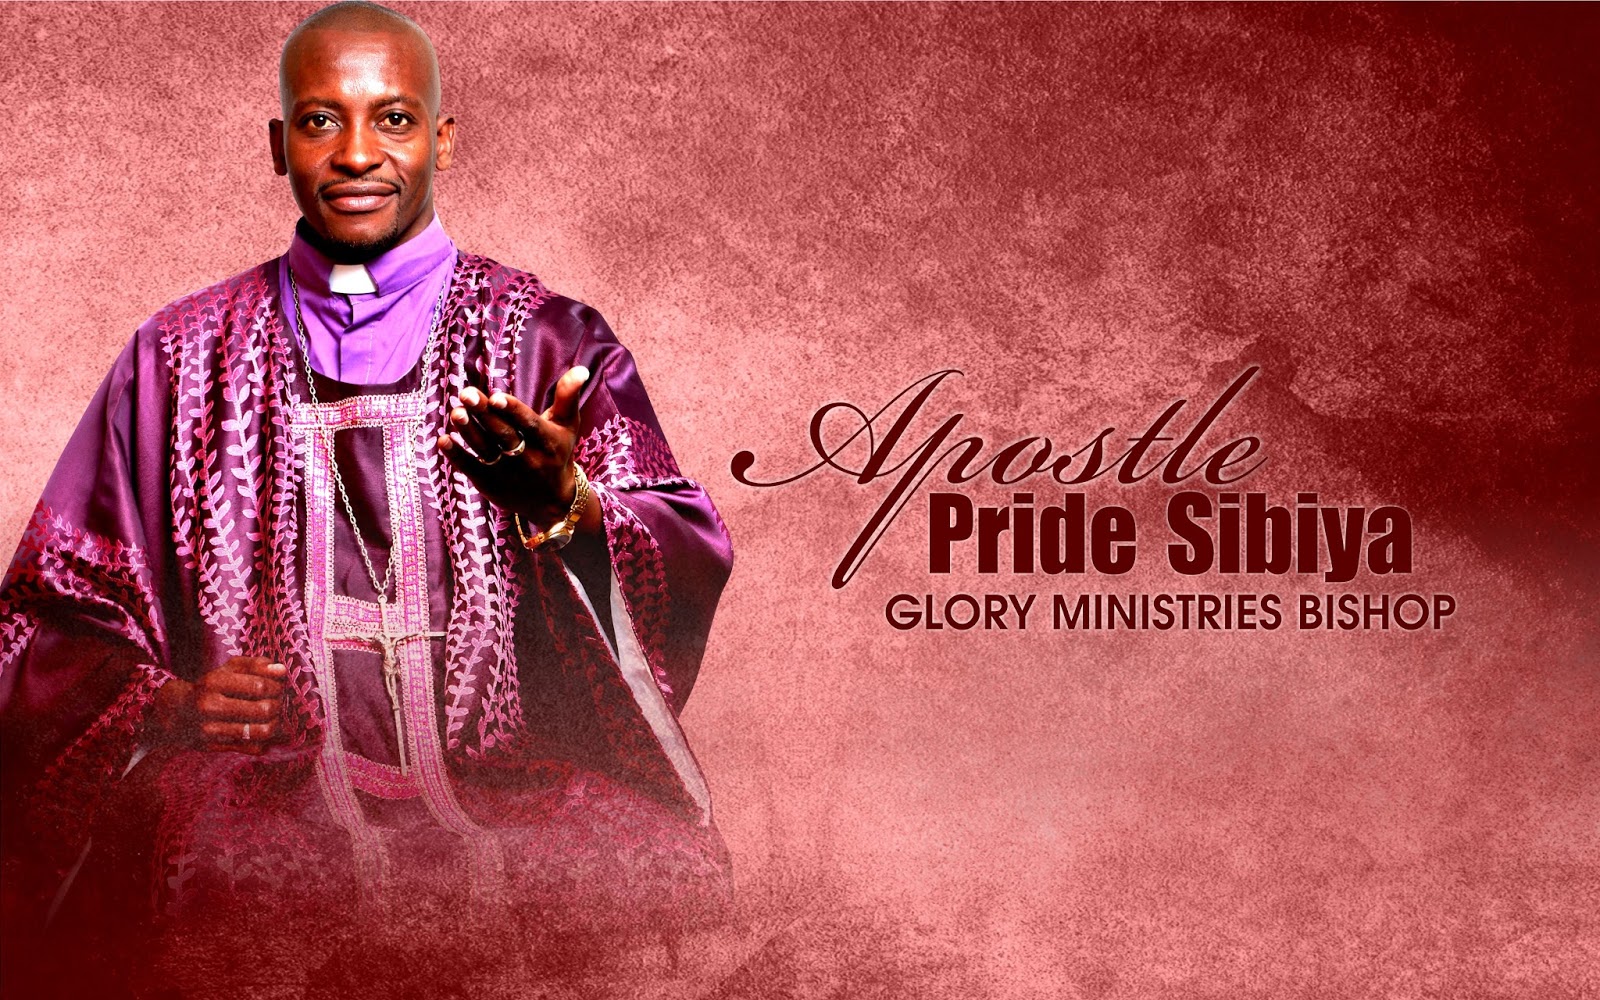 A Brief Profile Of Apostle Pride Sibiya -- The Founder and President Of Glory Ministries